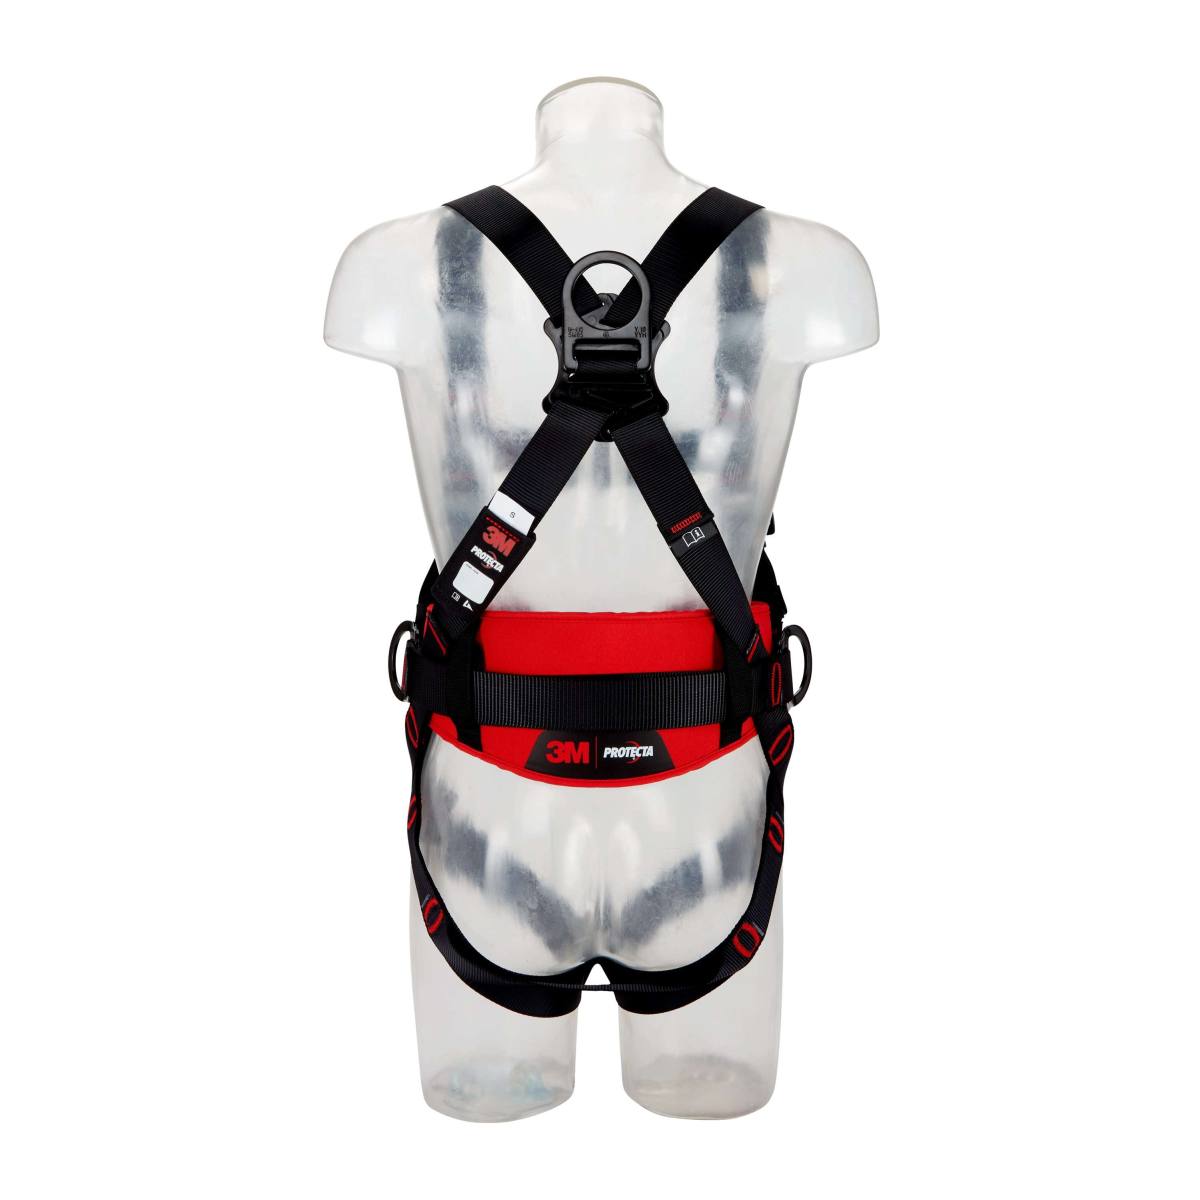 3M PROTECTA Full body harness - chest and rear fall arrest eyelets, comfort harness with side attachment points, automatic buckles, chest and rear fall indicators, belt end depot, label protection with labelling field, black coated, M/L